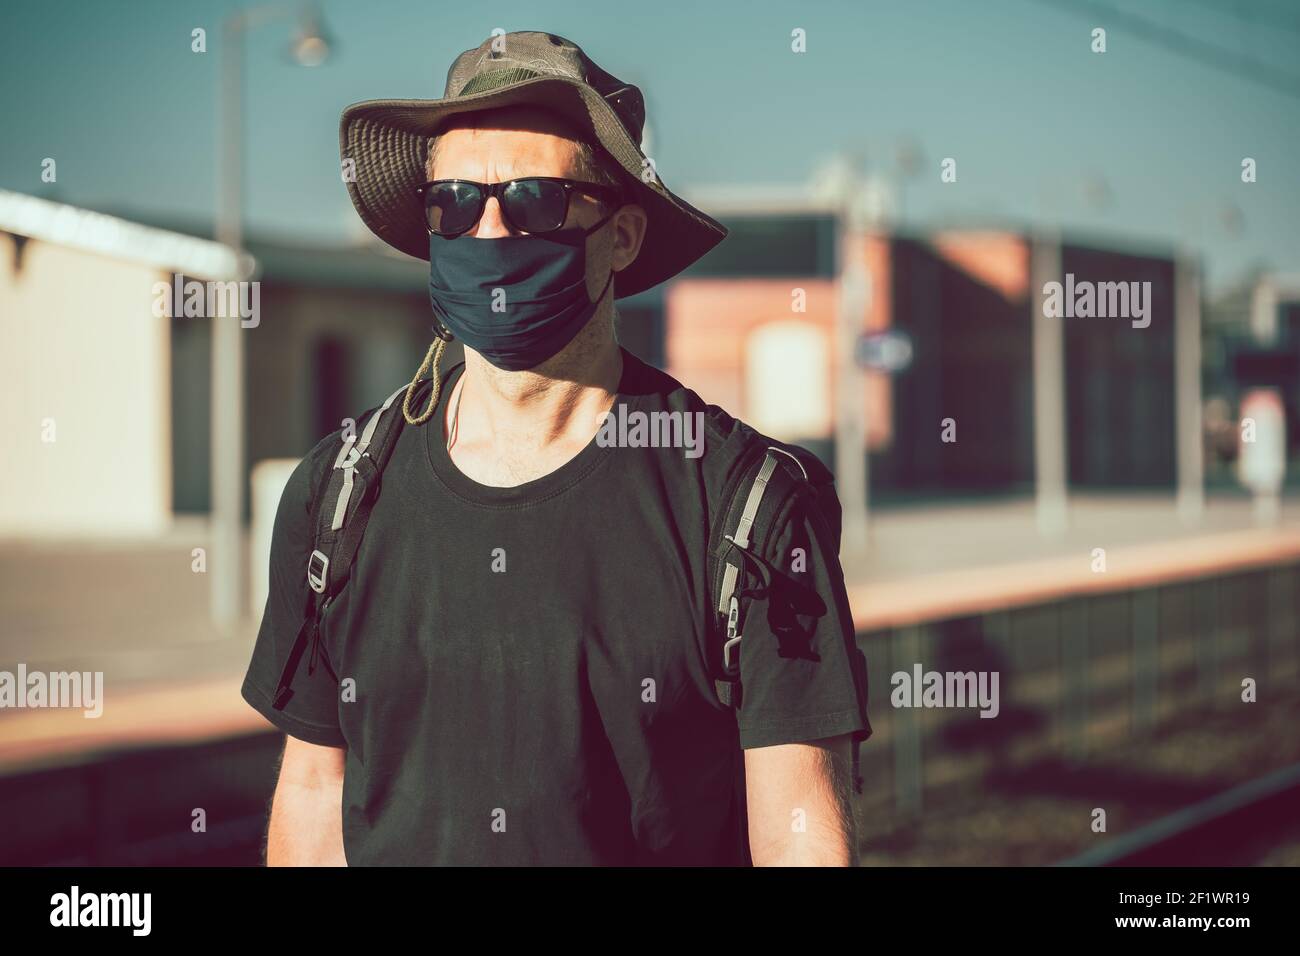 Man with a mask waiting for a train during Covid19 pandemic Stock Photo